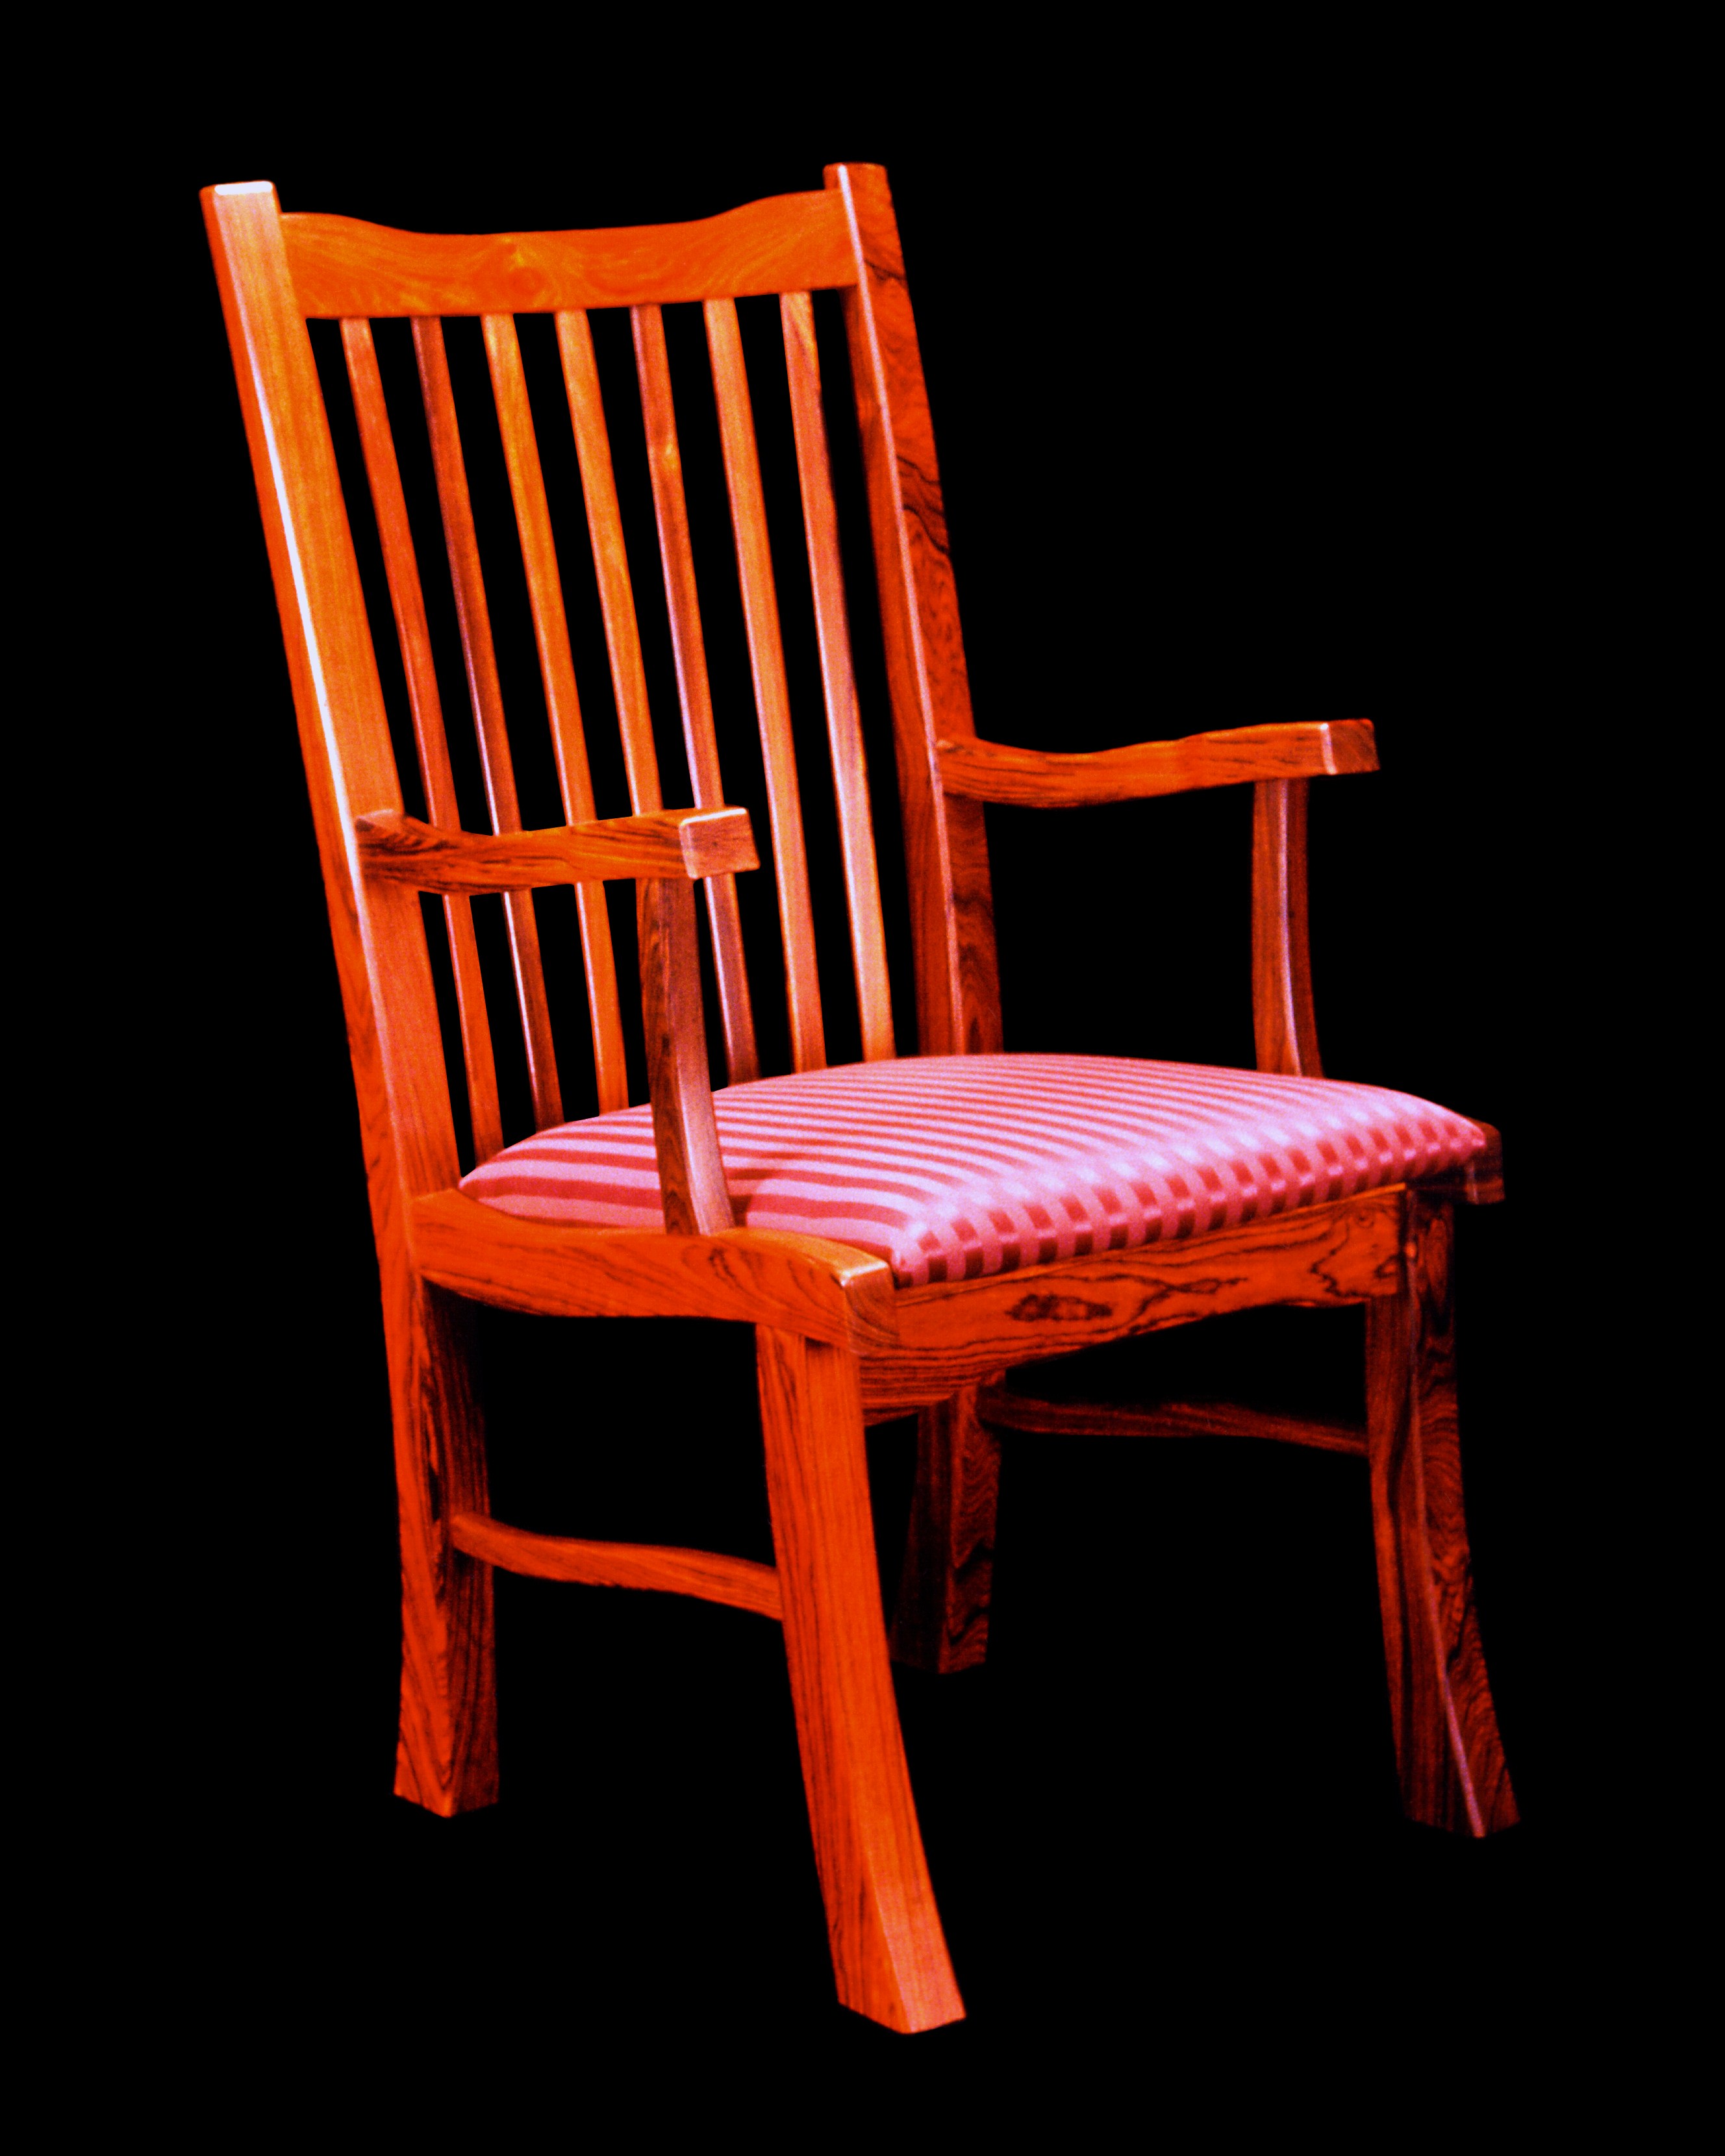 A Chair Brown Red-White Seat by Don DeDobbeleer, Fine Custom Wood Furniture